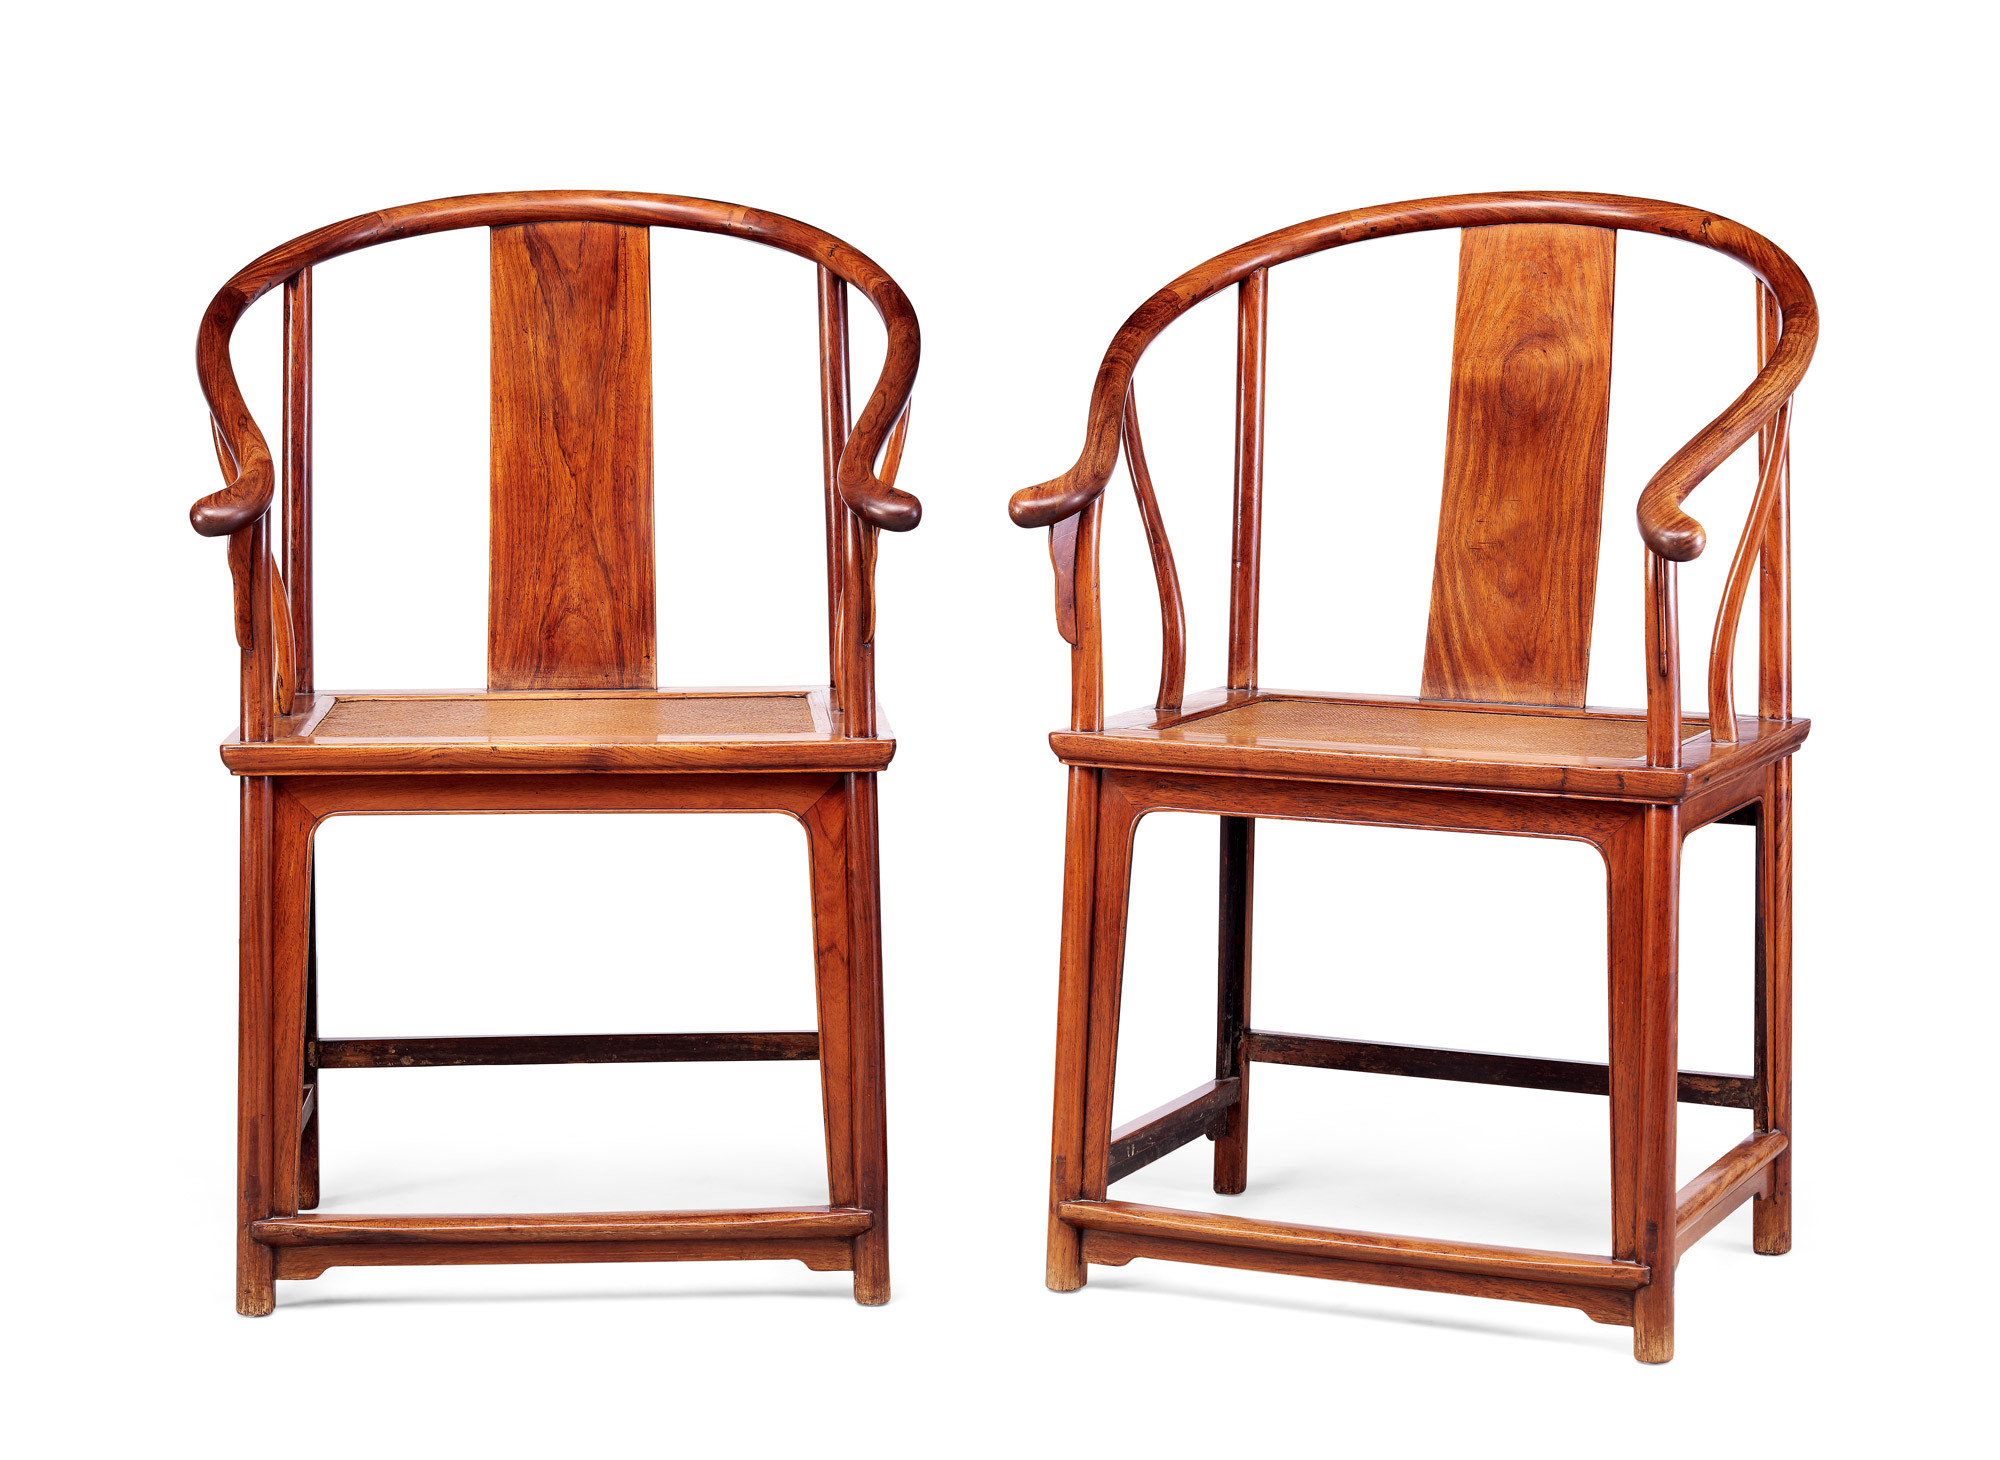 A PAIR OF HUANGHUALI-WOOD ARM CHAIRS